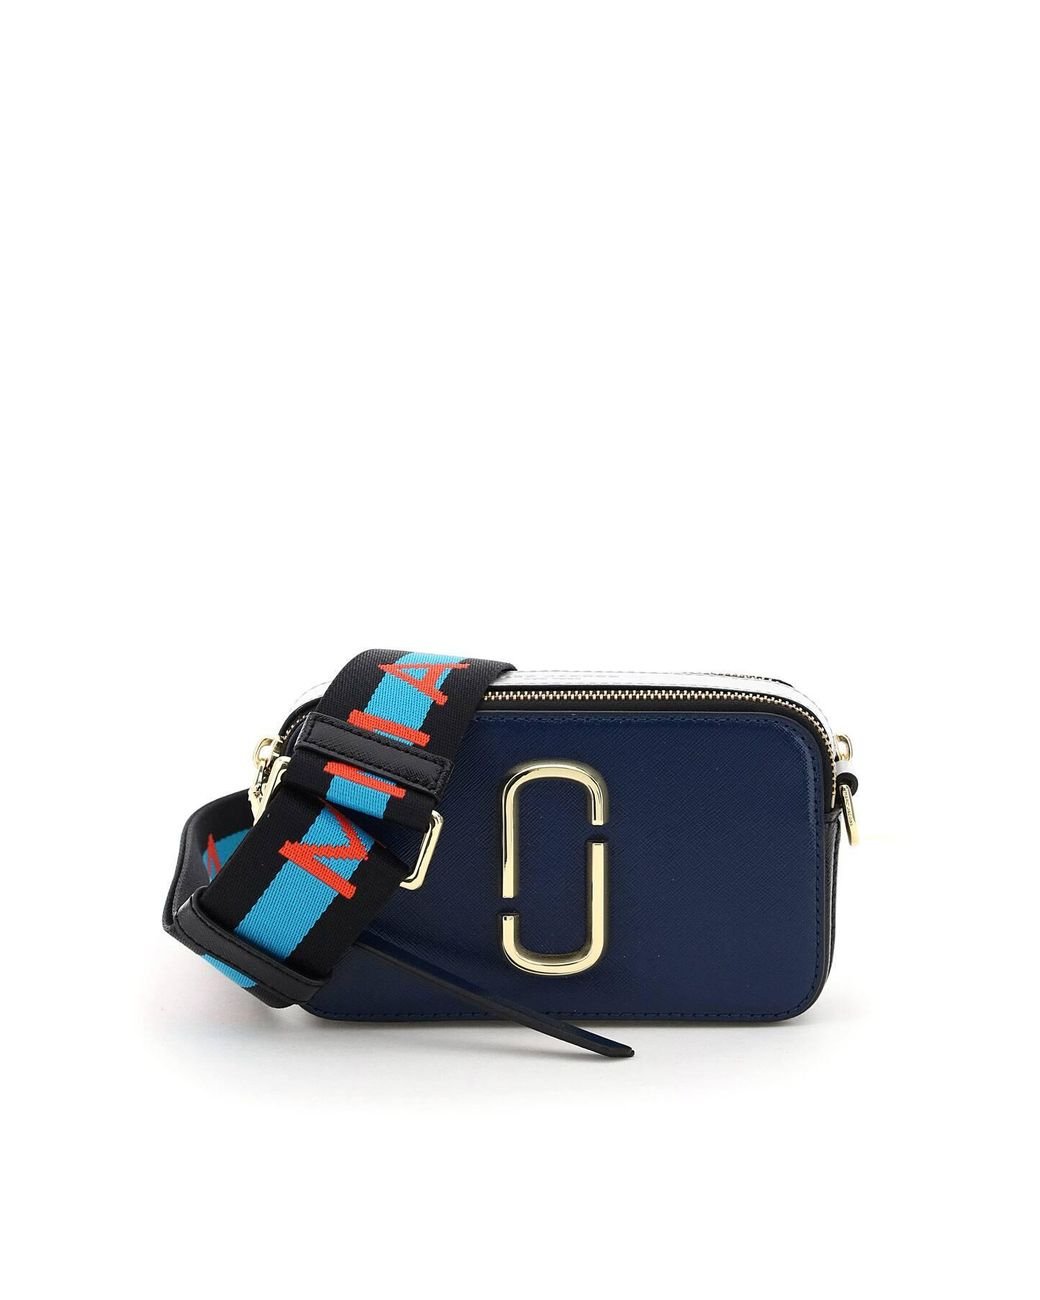 Marc Jacobs The Strap Blue Sea Multi One Size